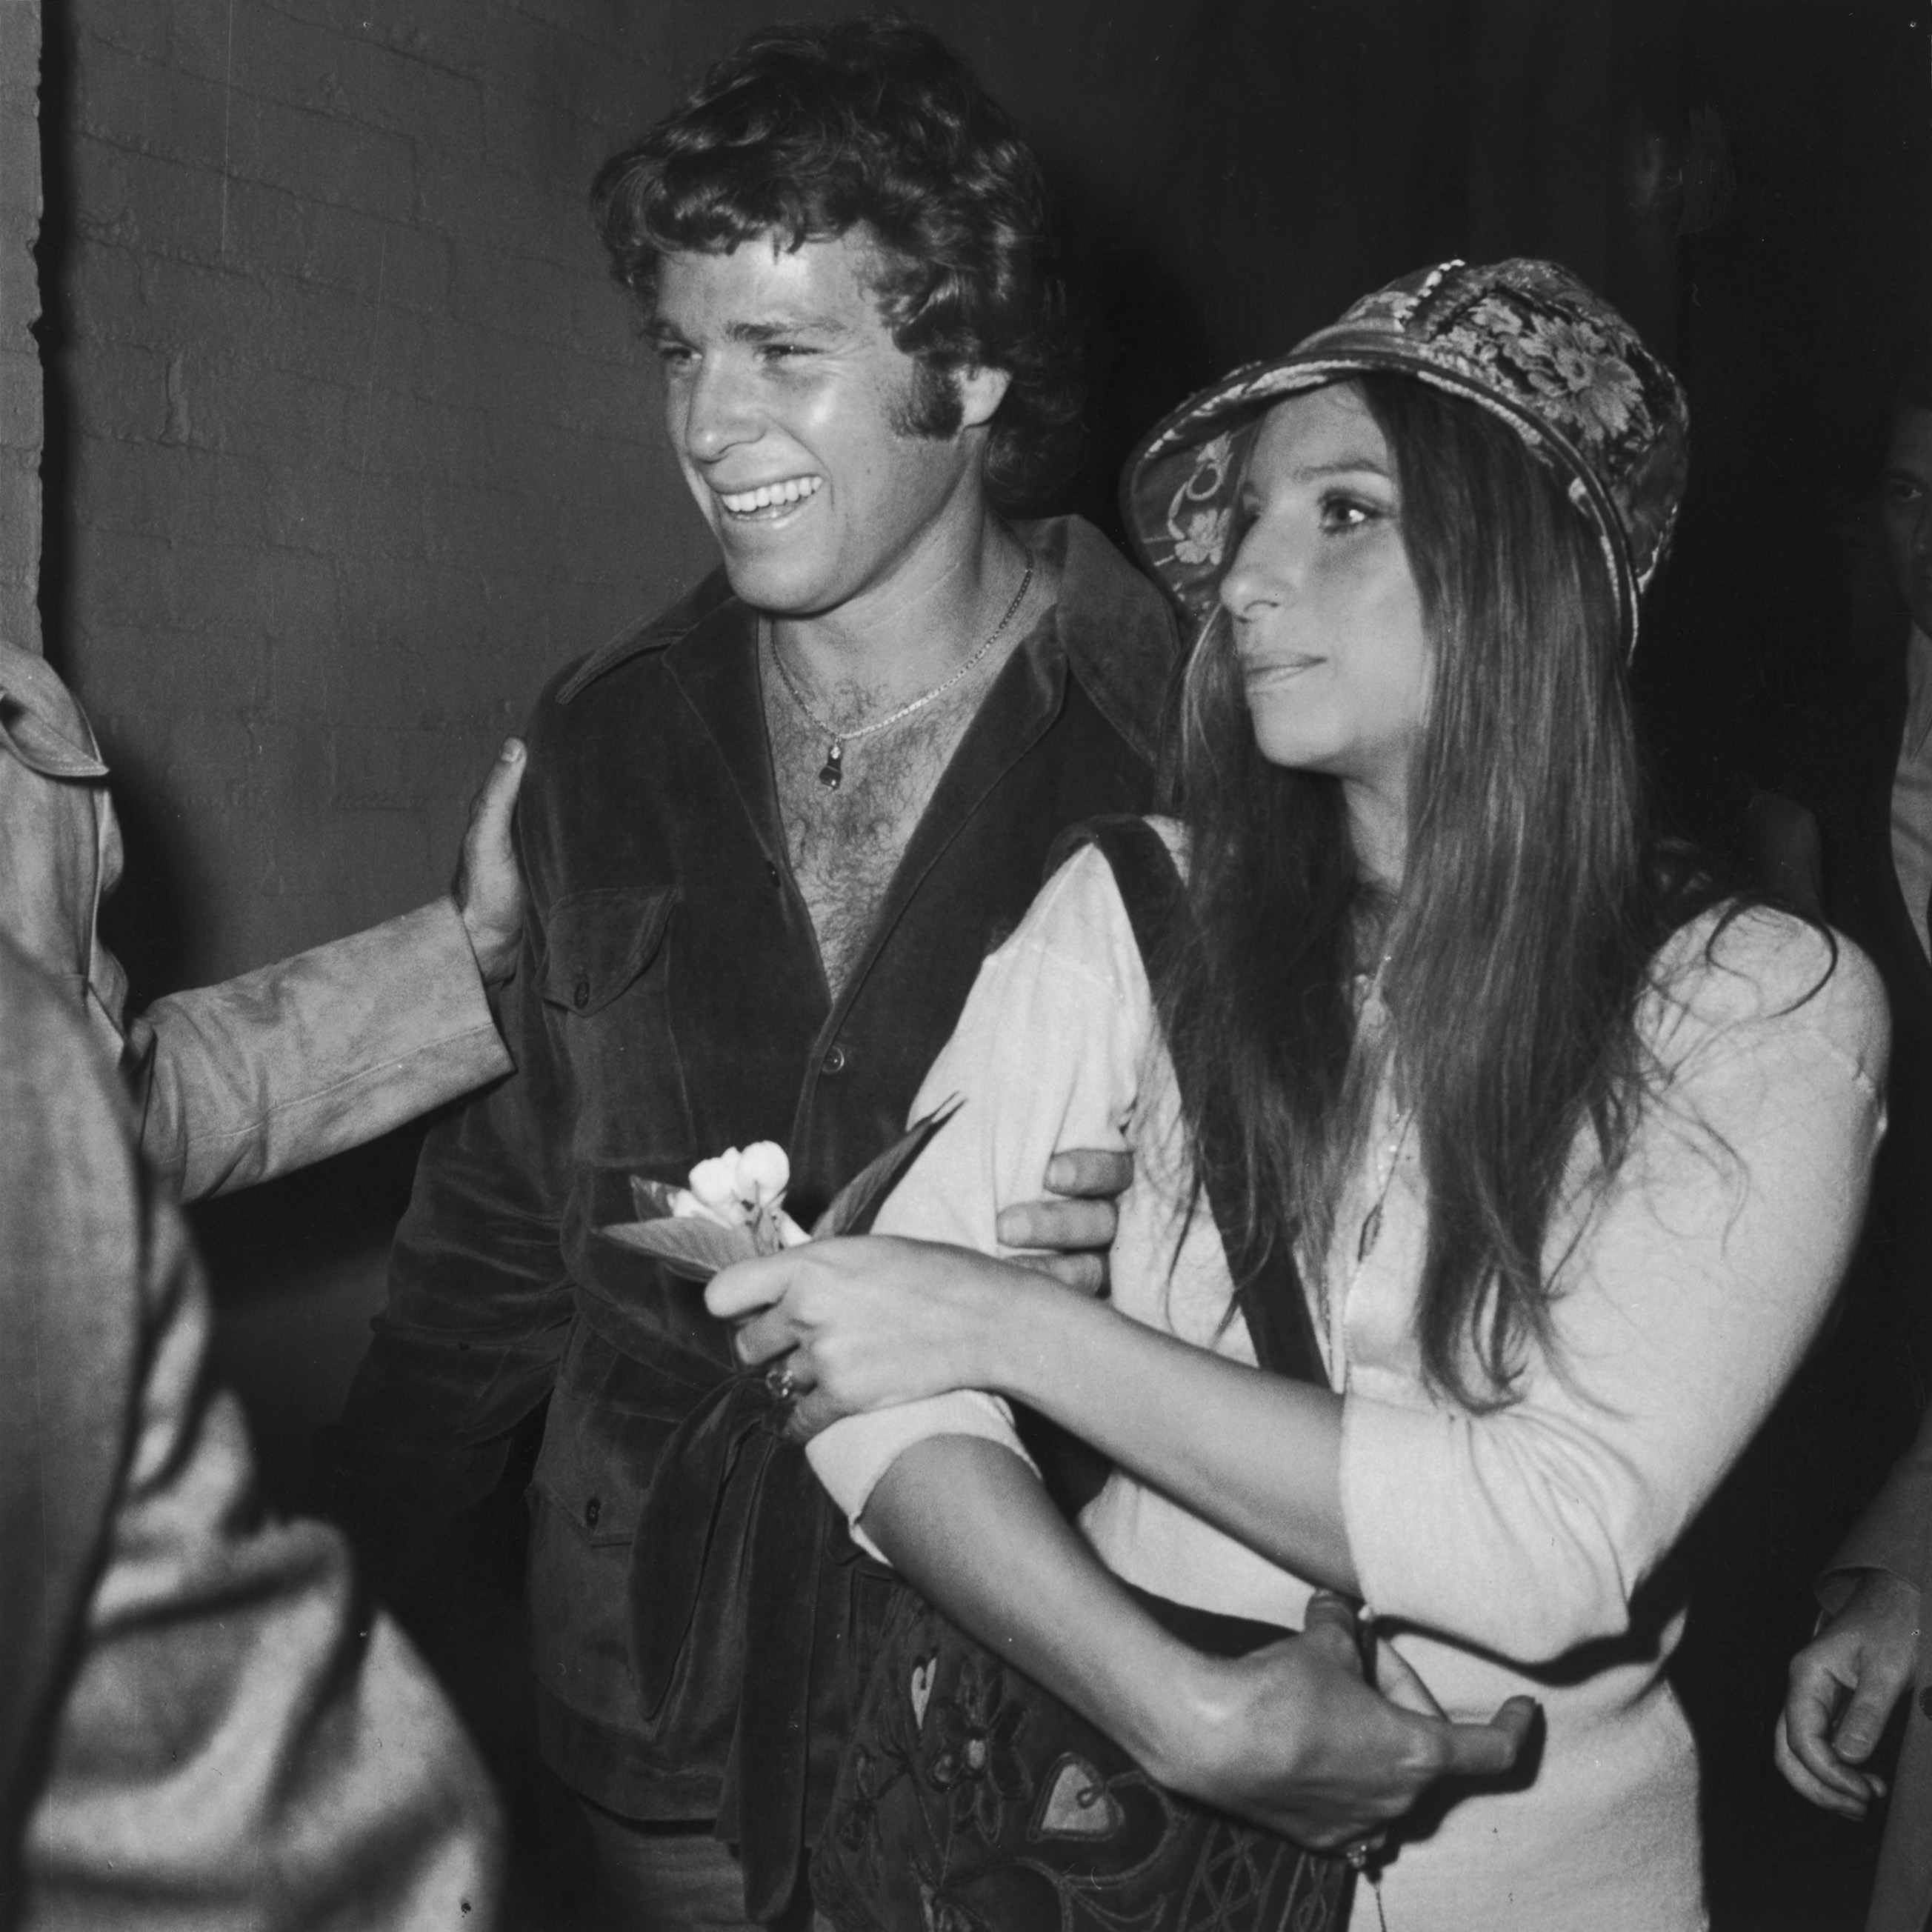 American actress and singer Barbra Streisand with actor Ryan O'Neal at a screening of the film 'Wild Rovers', in which O'Neal stars, June 1971 | Source: Getty Images